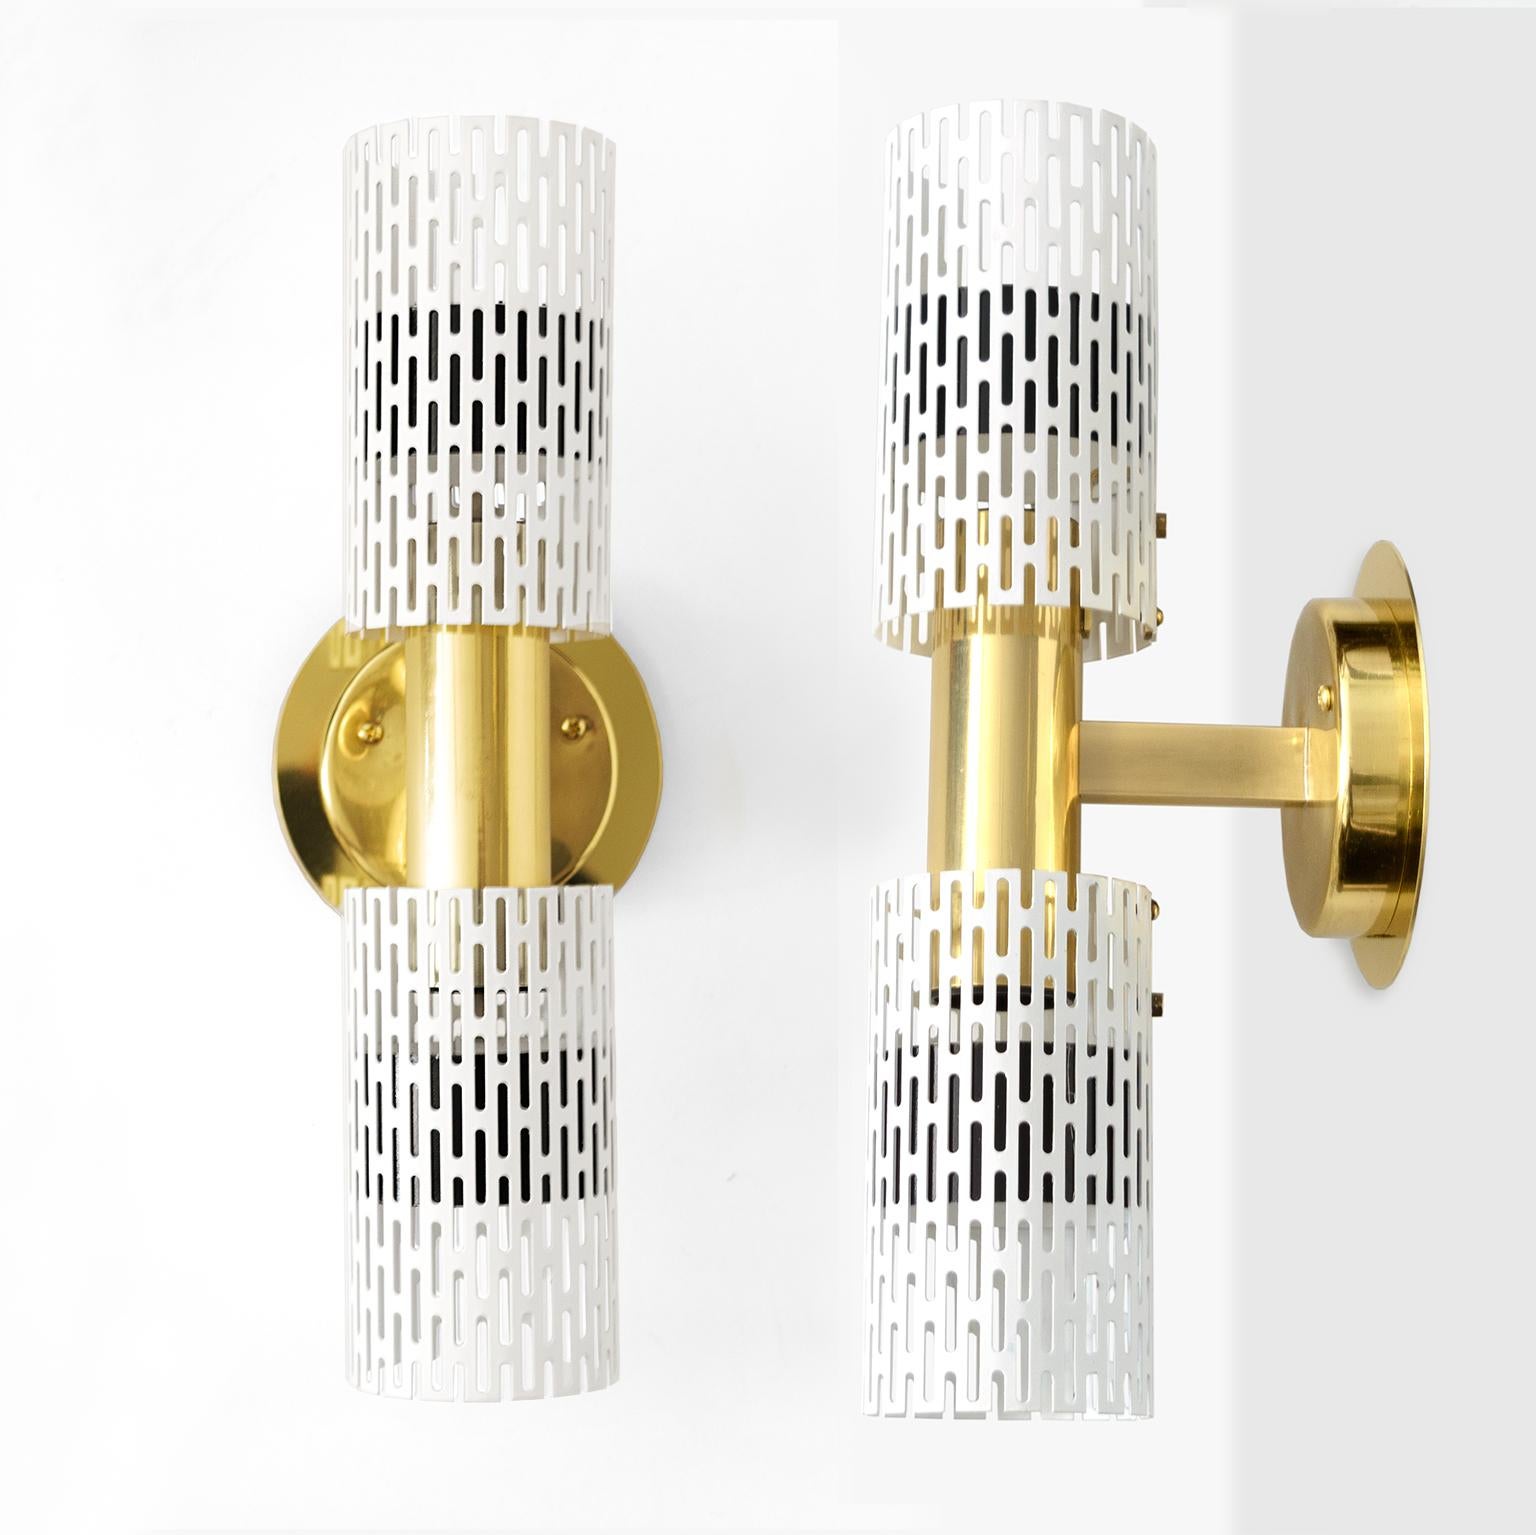 A pair of Harald Notini designed wall sconces with pieced tubular painted metal shades and polished brass frame and back plate. A custom brass element was created to allow easy installation for a standard American ‘J-box”. The sconces have been